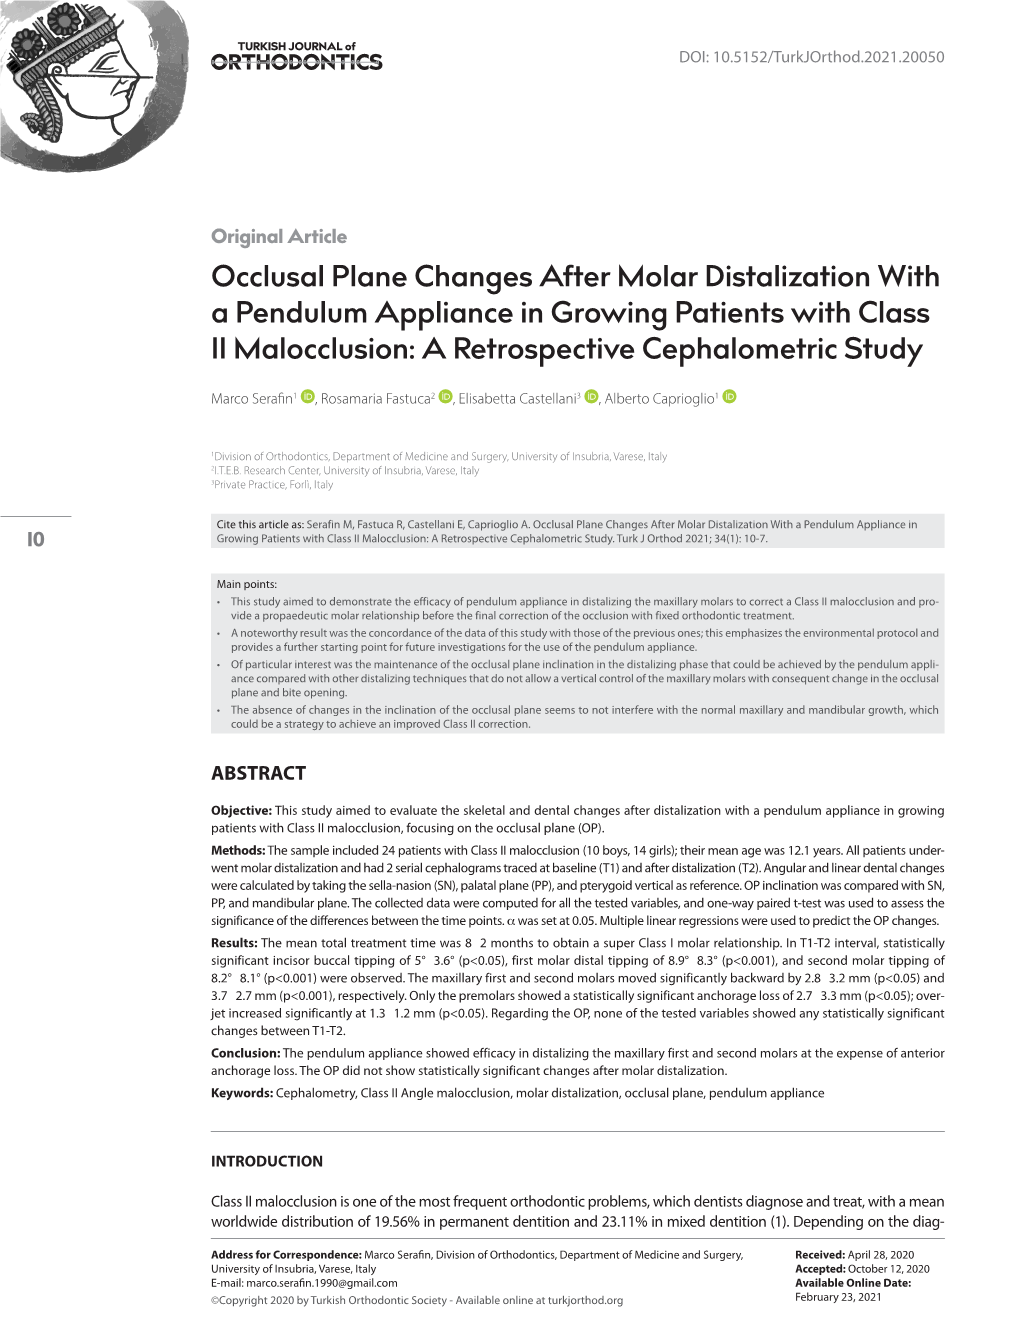 Occlusal Plane Changes After Molar Distalization with a Pendulum Appliance in Growing Patients with Class II Malocclusion: a Retrospective Cephalometric Study